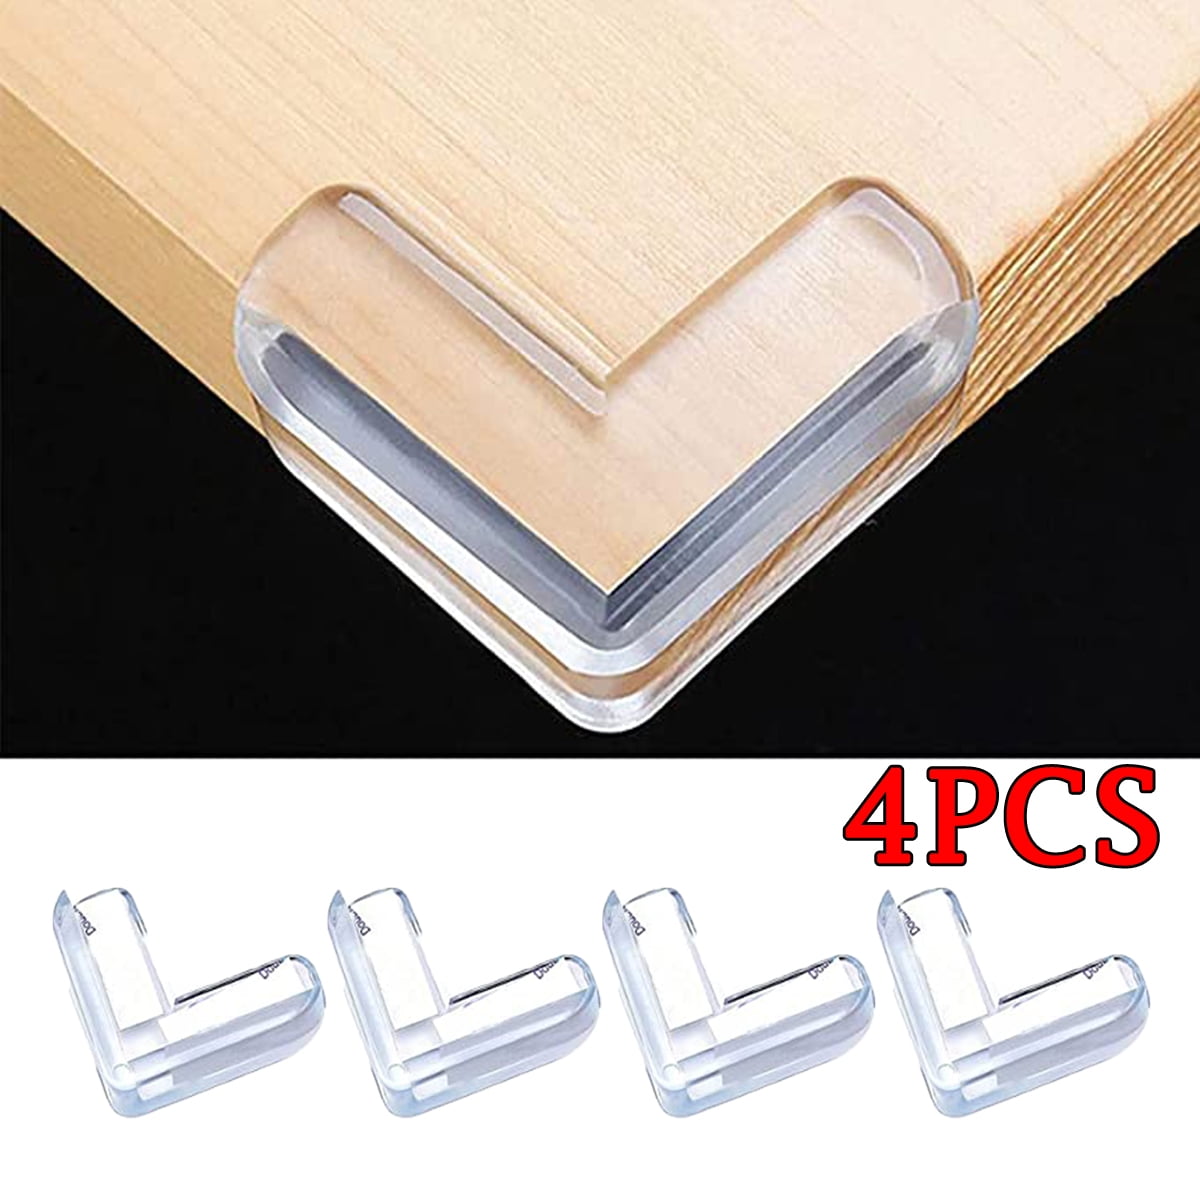 Edge Protector Baby Proofing Corner Protectors Clear Corner Guards Silicone  Child Safety Edge Covers Bumper for Table, Cabinets, Crib, 6.6 ft x 0.6